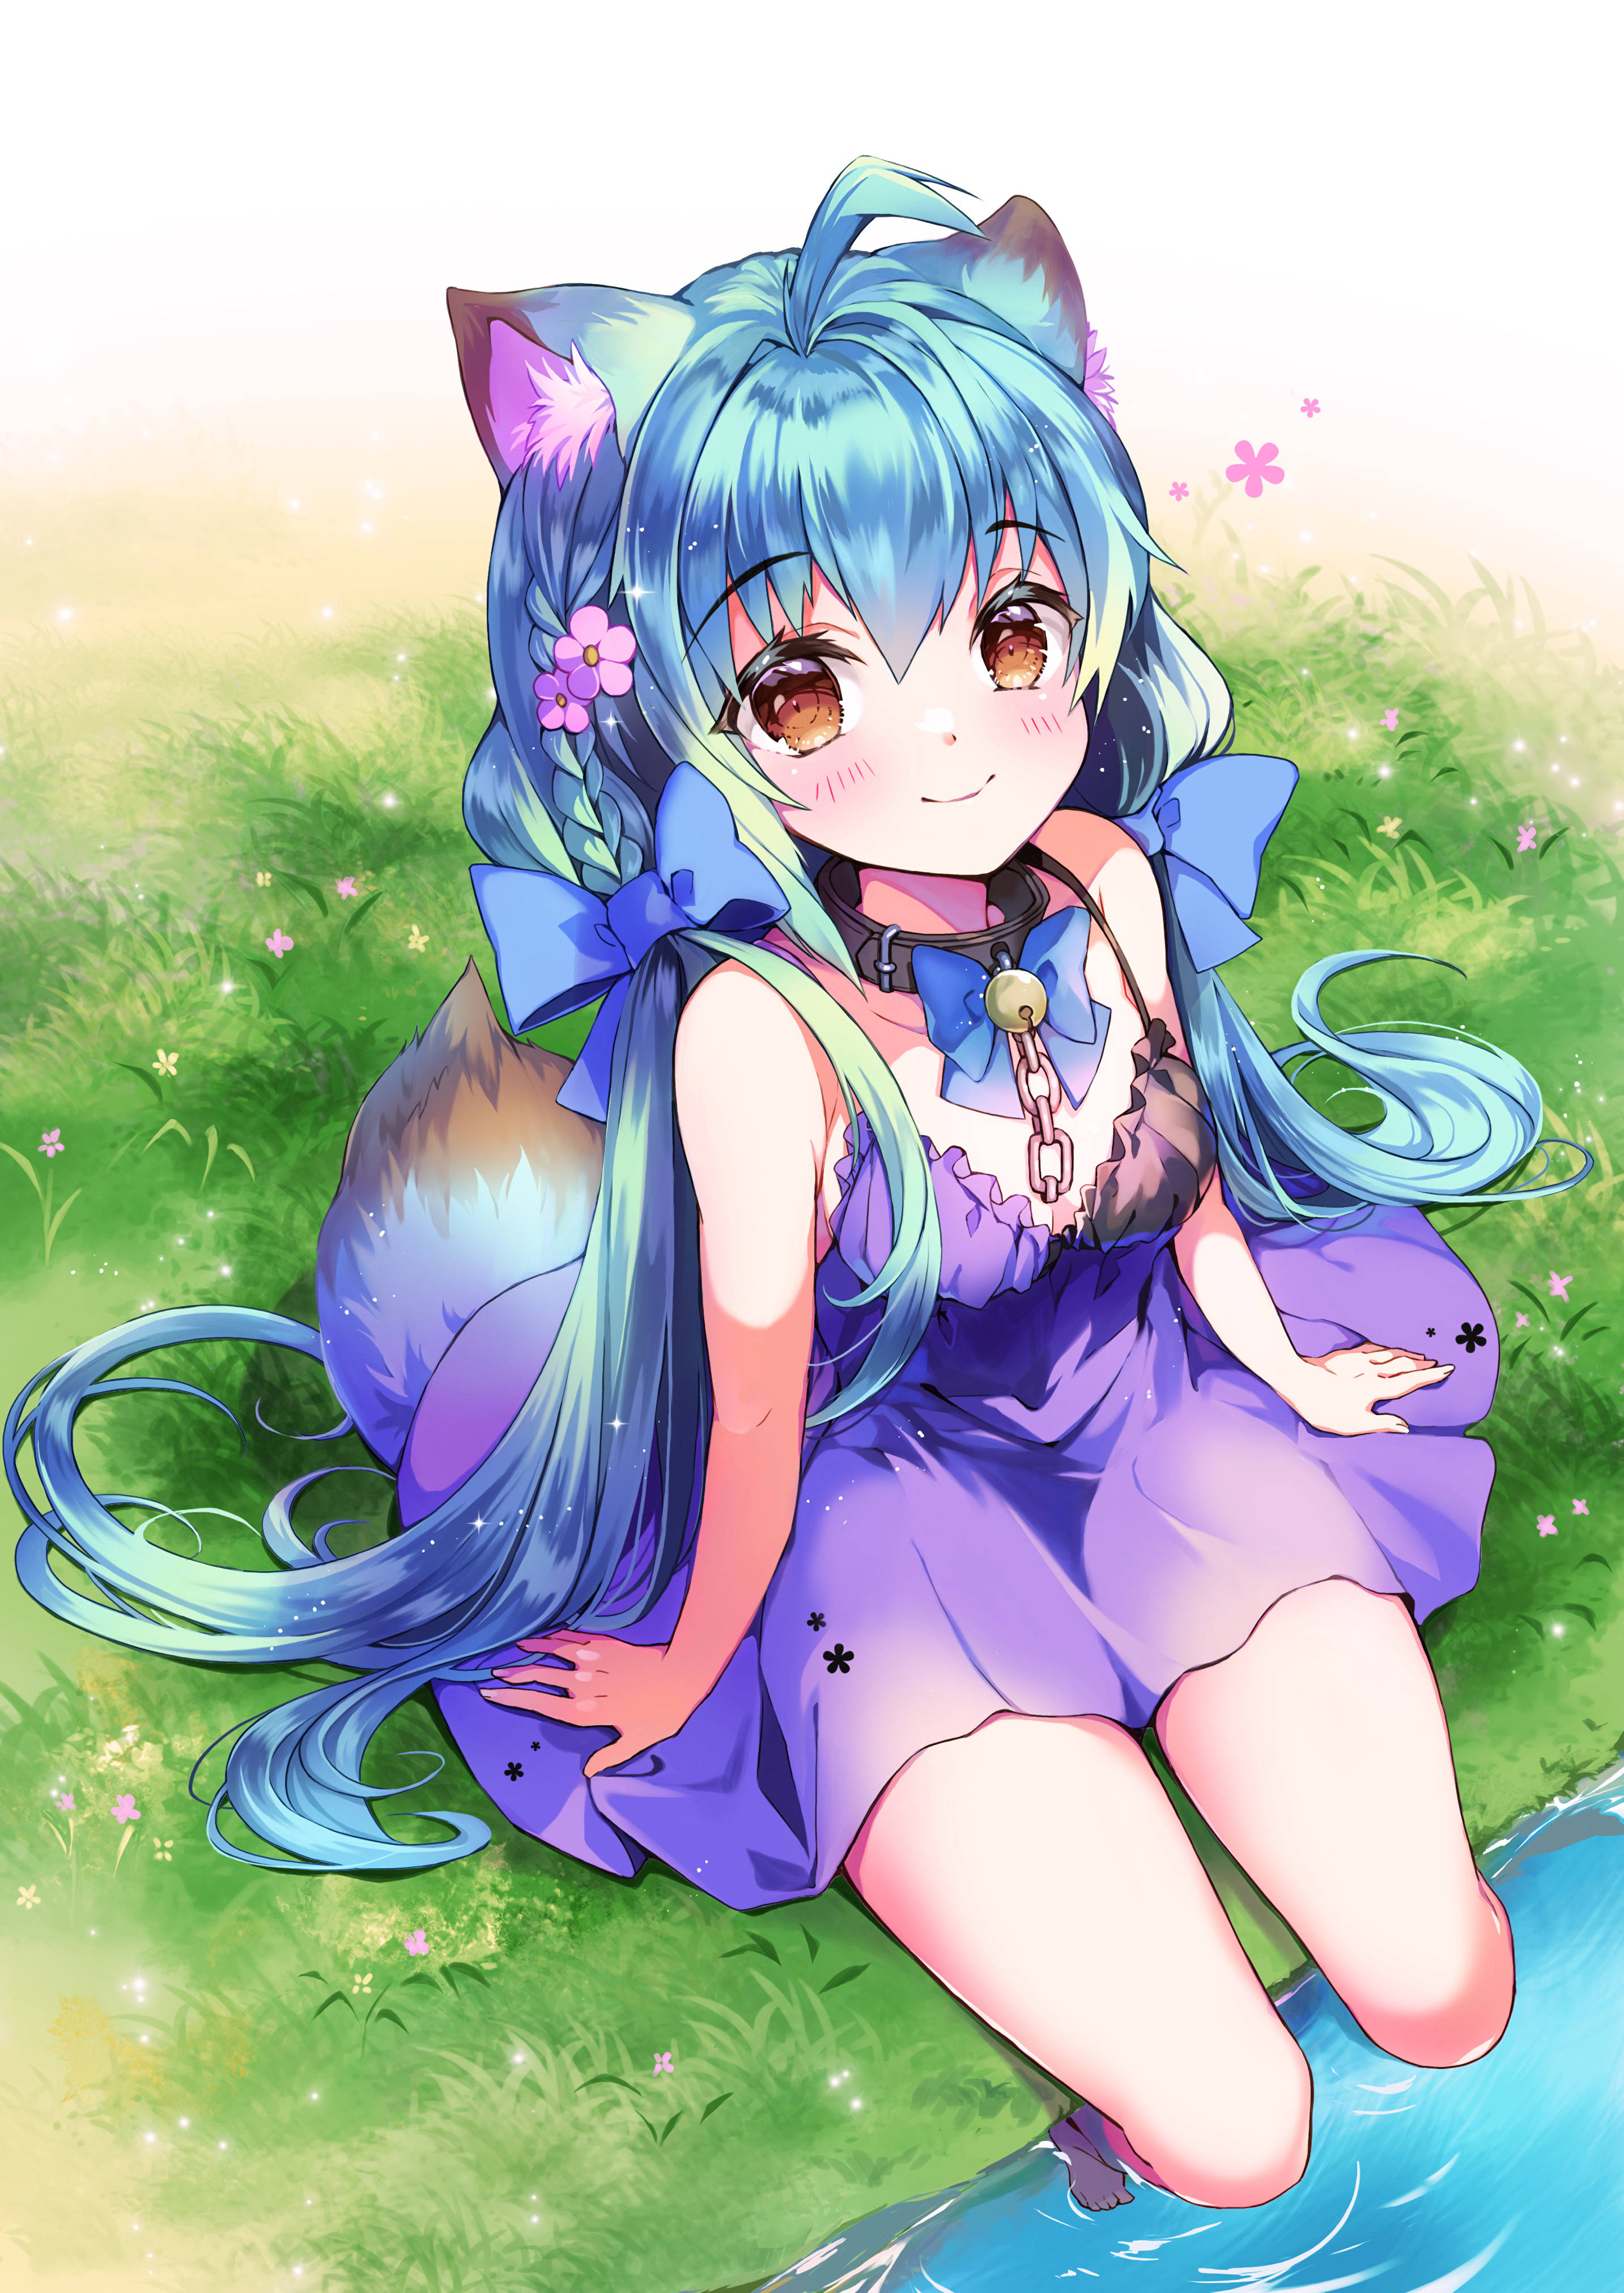 Download Cute Anime Girl With Blue Hair Wallpaper